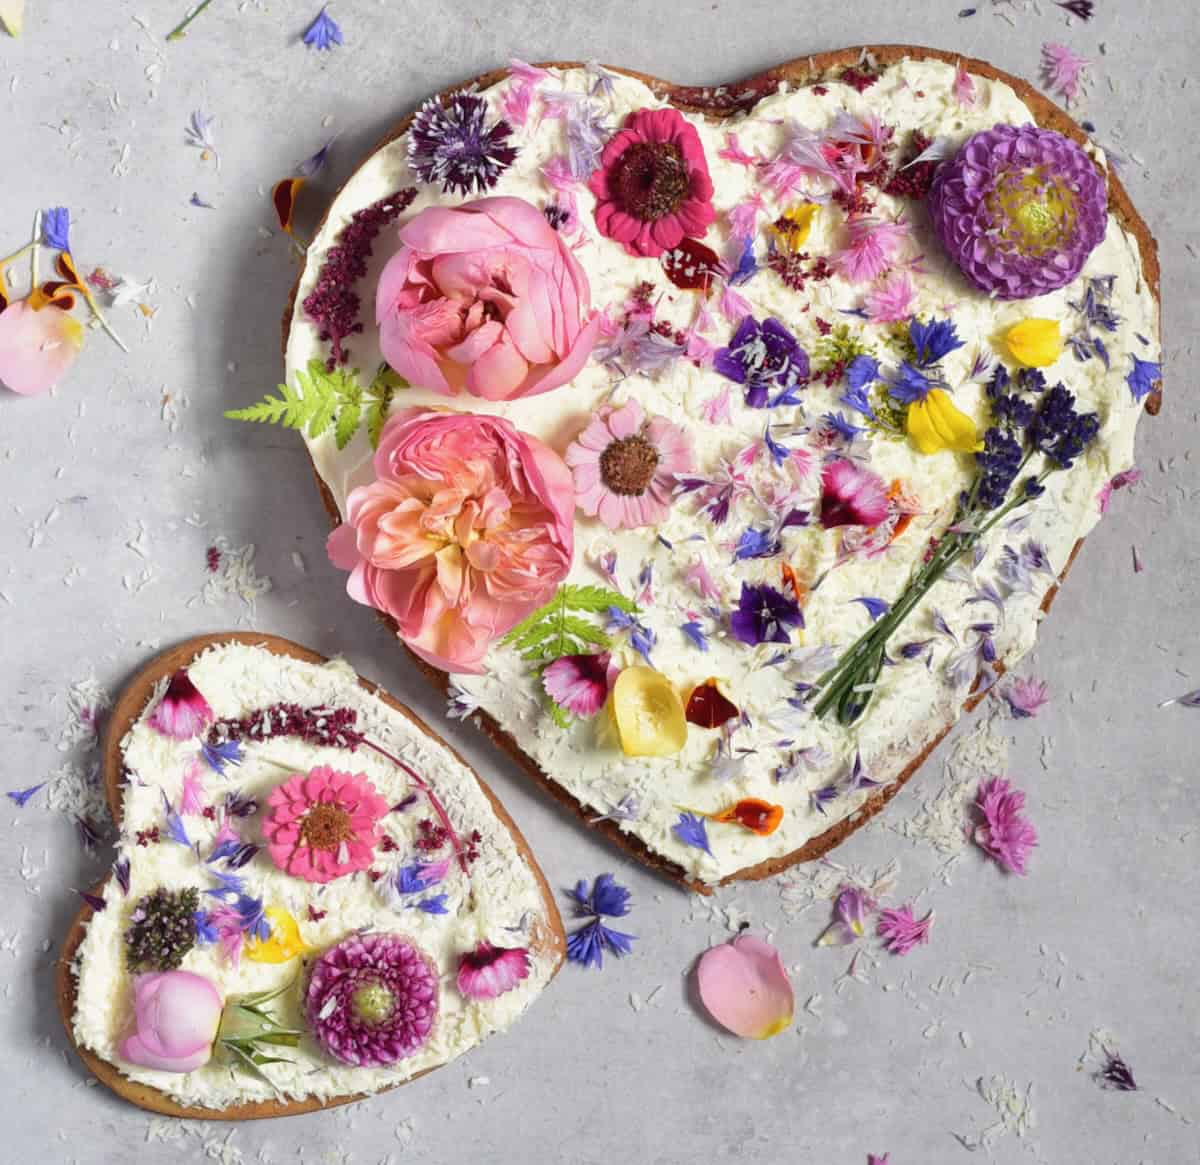 A small and a big heart-shaped cakes topped with cream and edible flowers